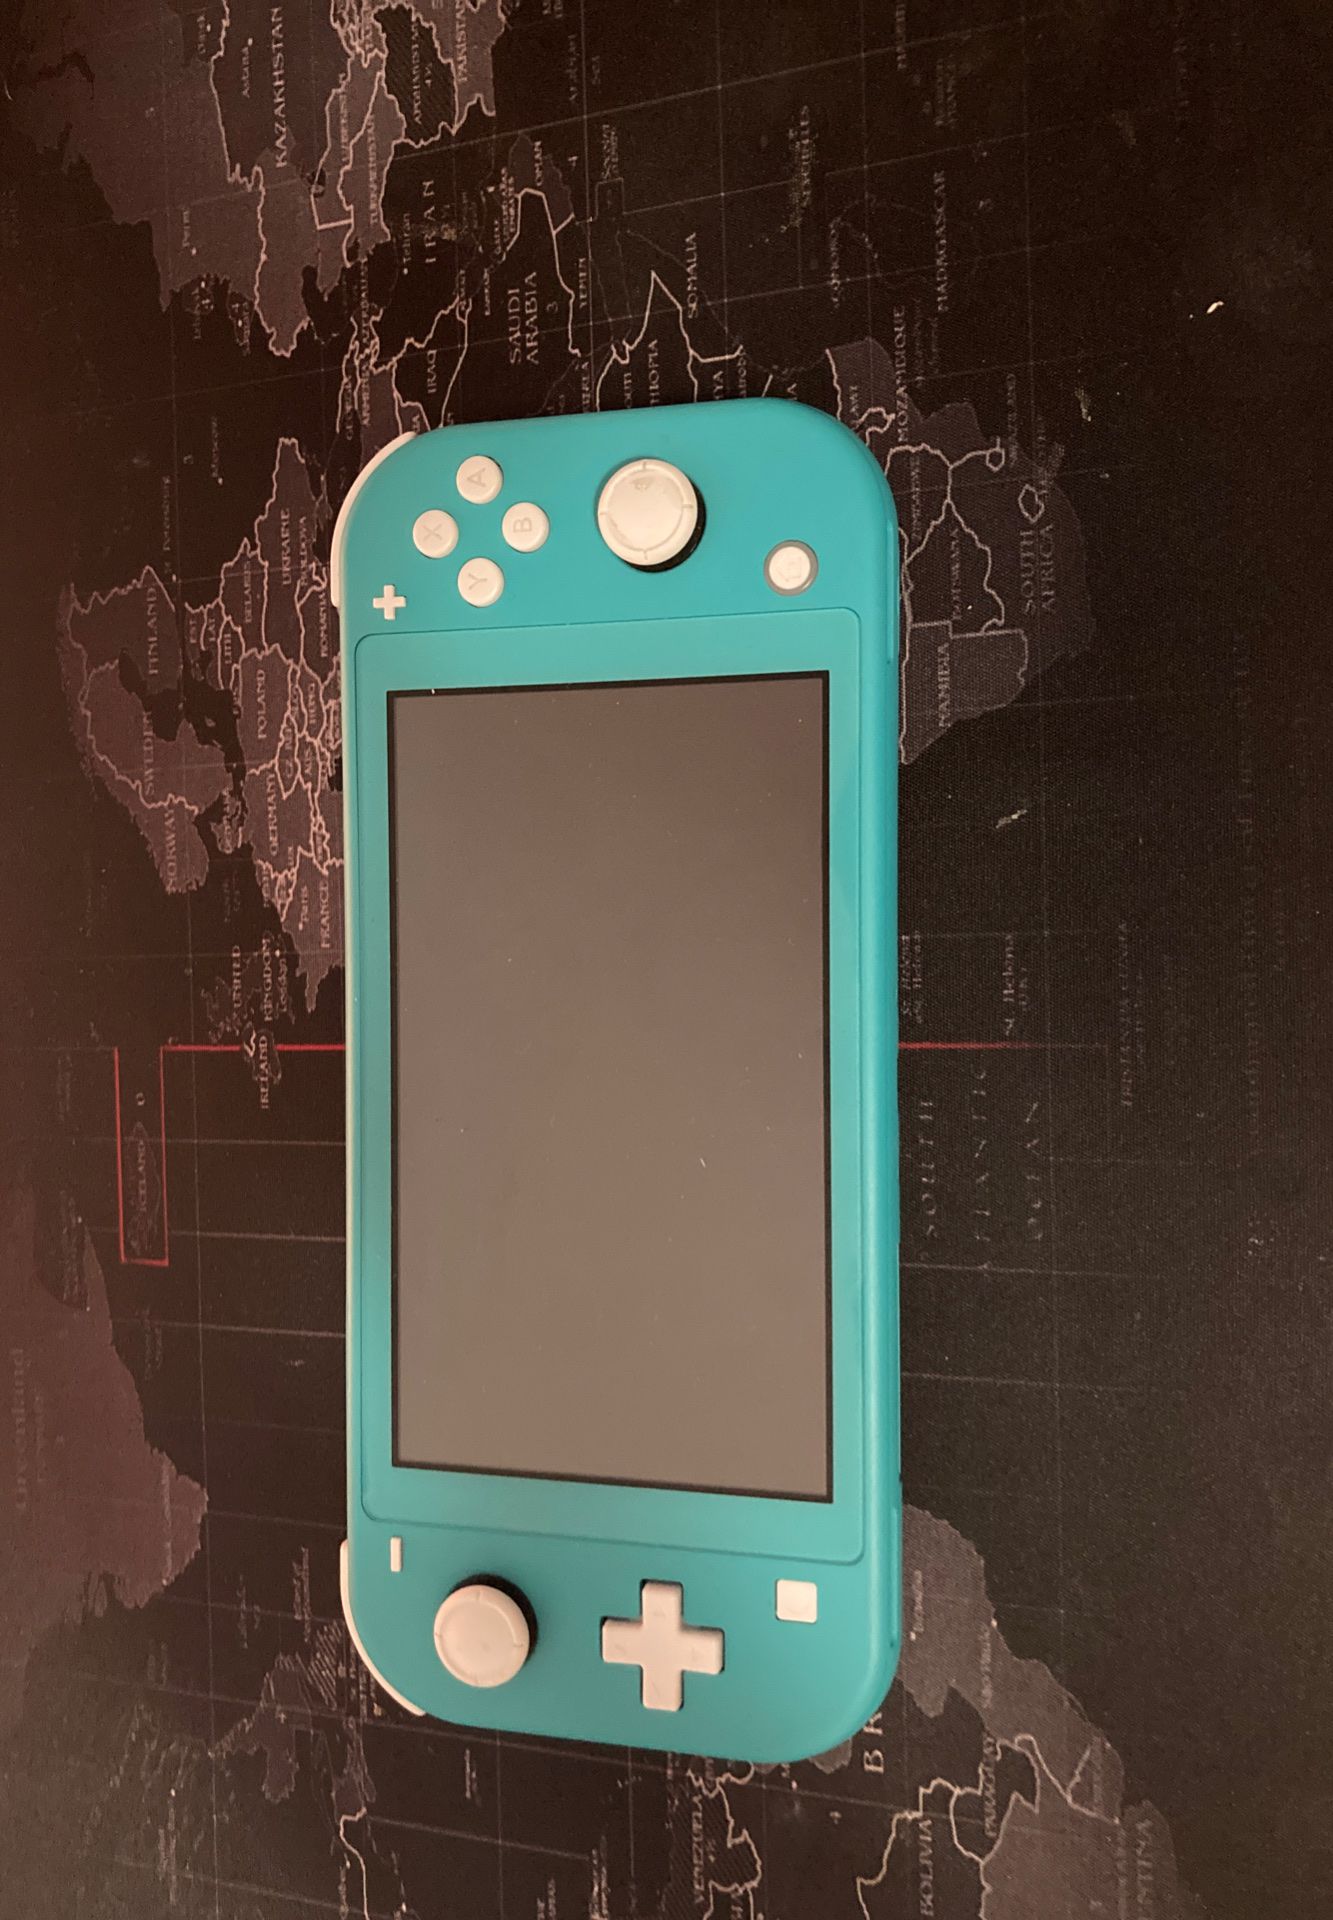 Nintendo switch lite (turquoise) barley used with carrying case and charger